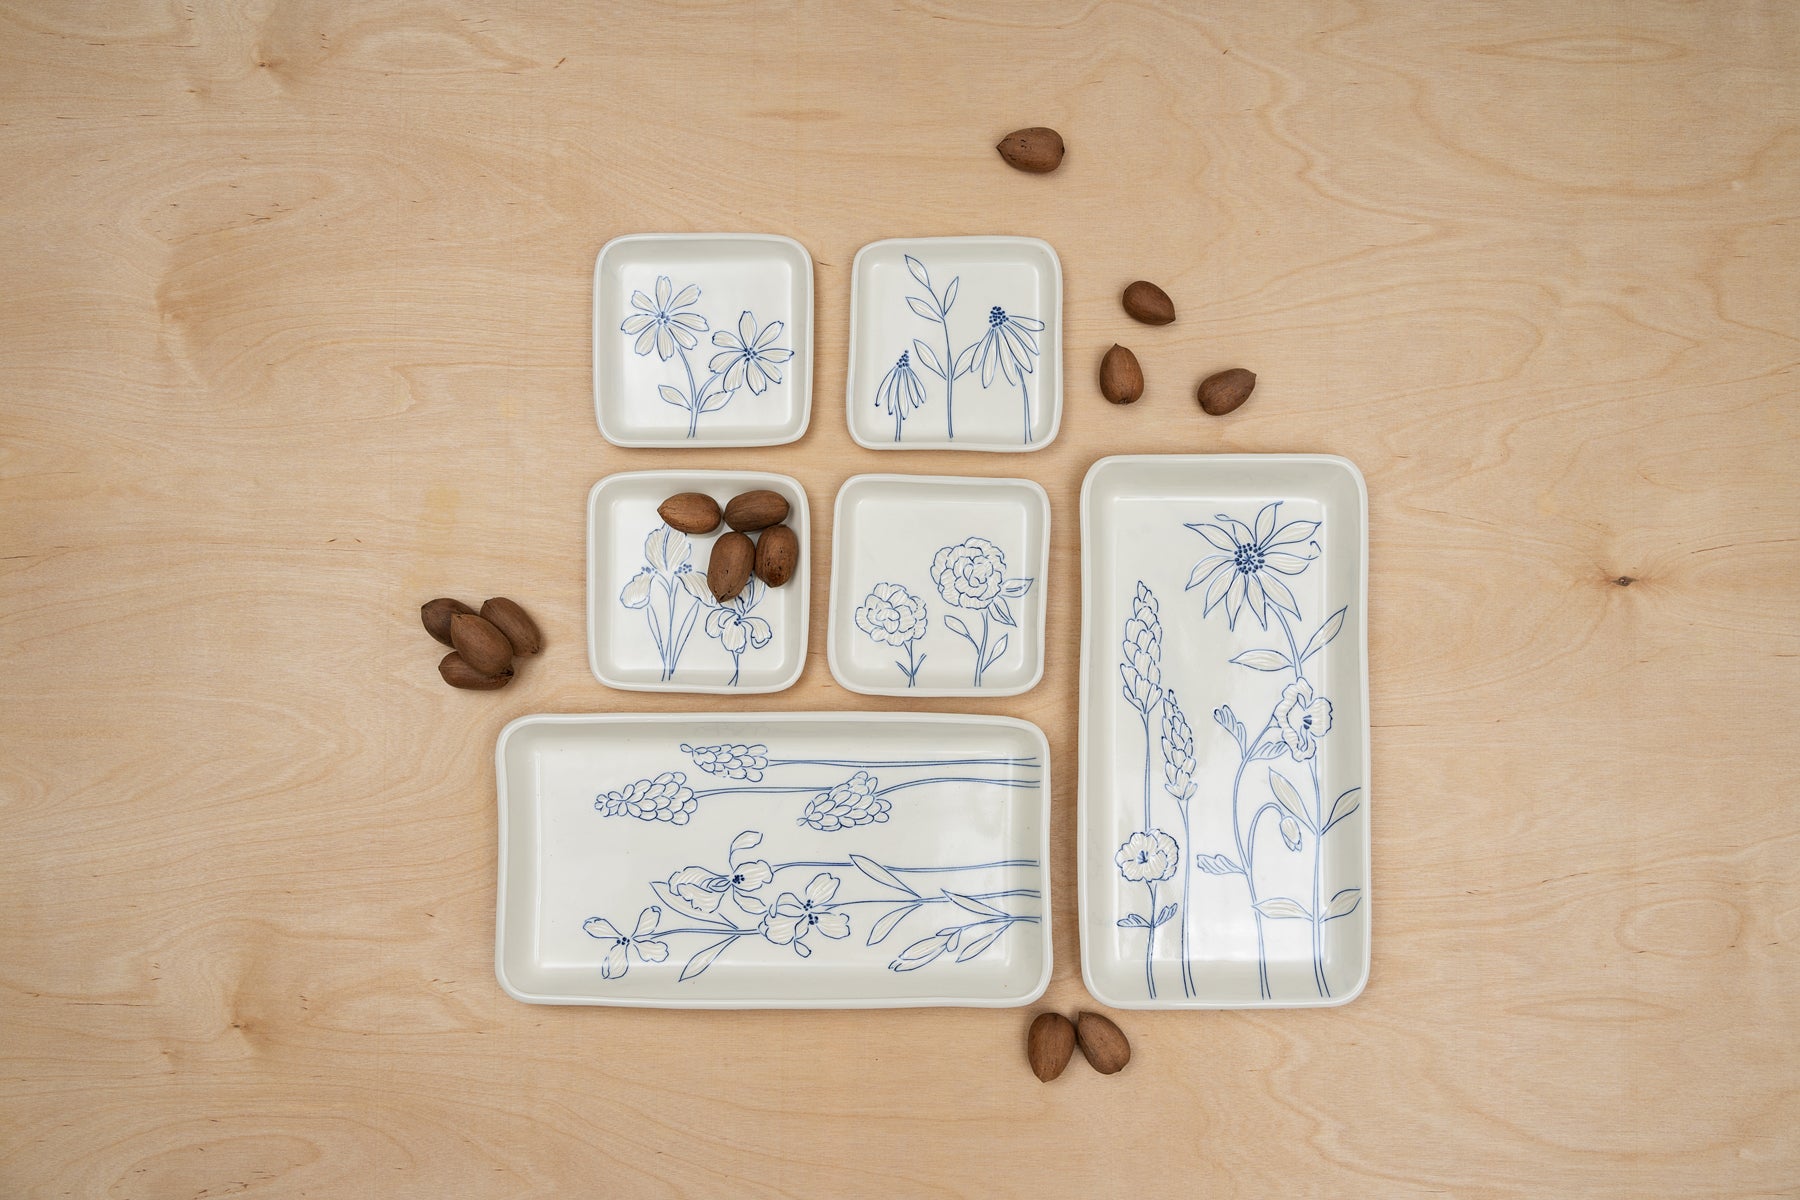 Rectangular and square porcelain plates with blue inlay viewed from above on a table by ceramic artist Julie Wiggins. Unshelled pecans are scattered about the table top